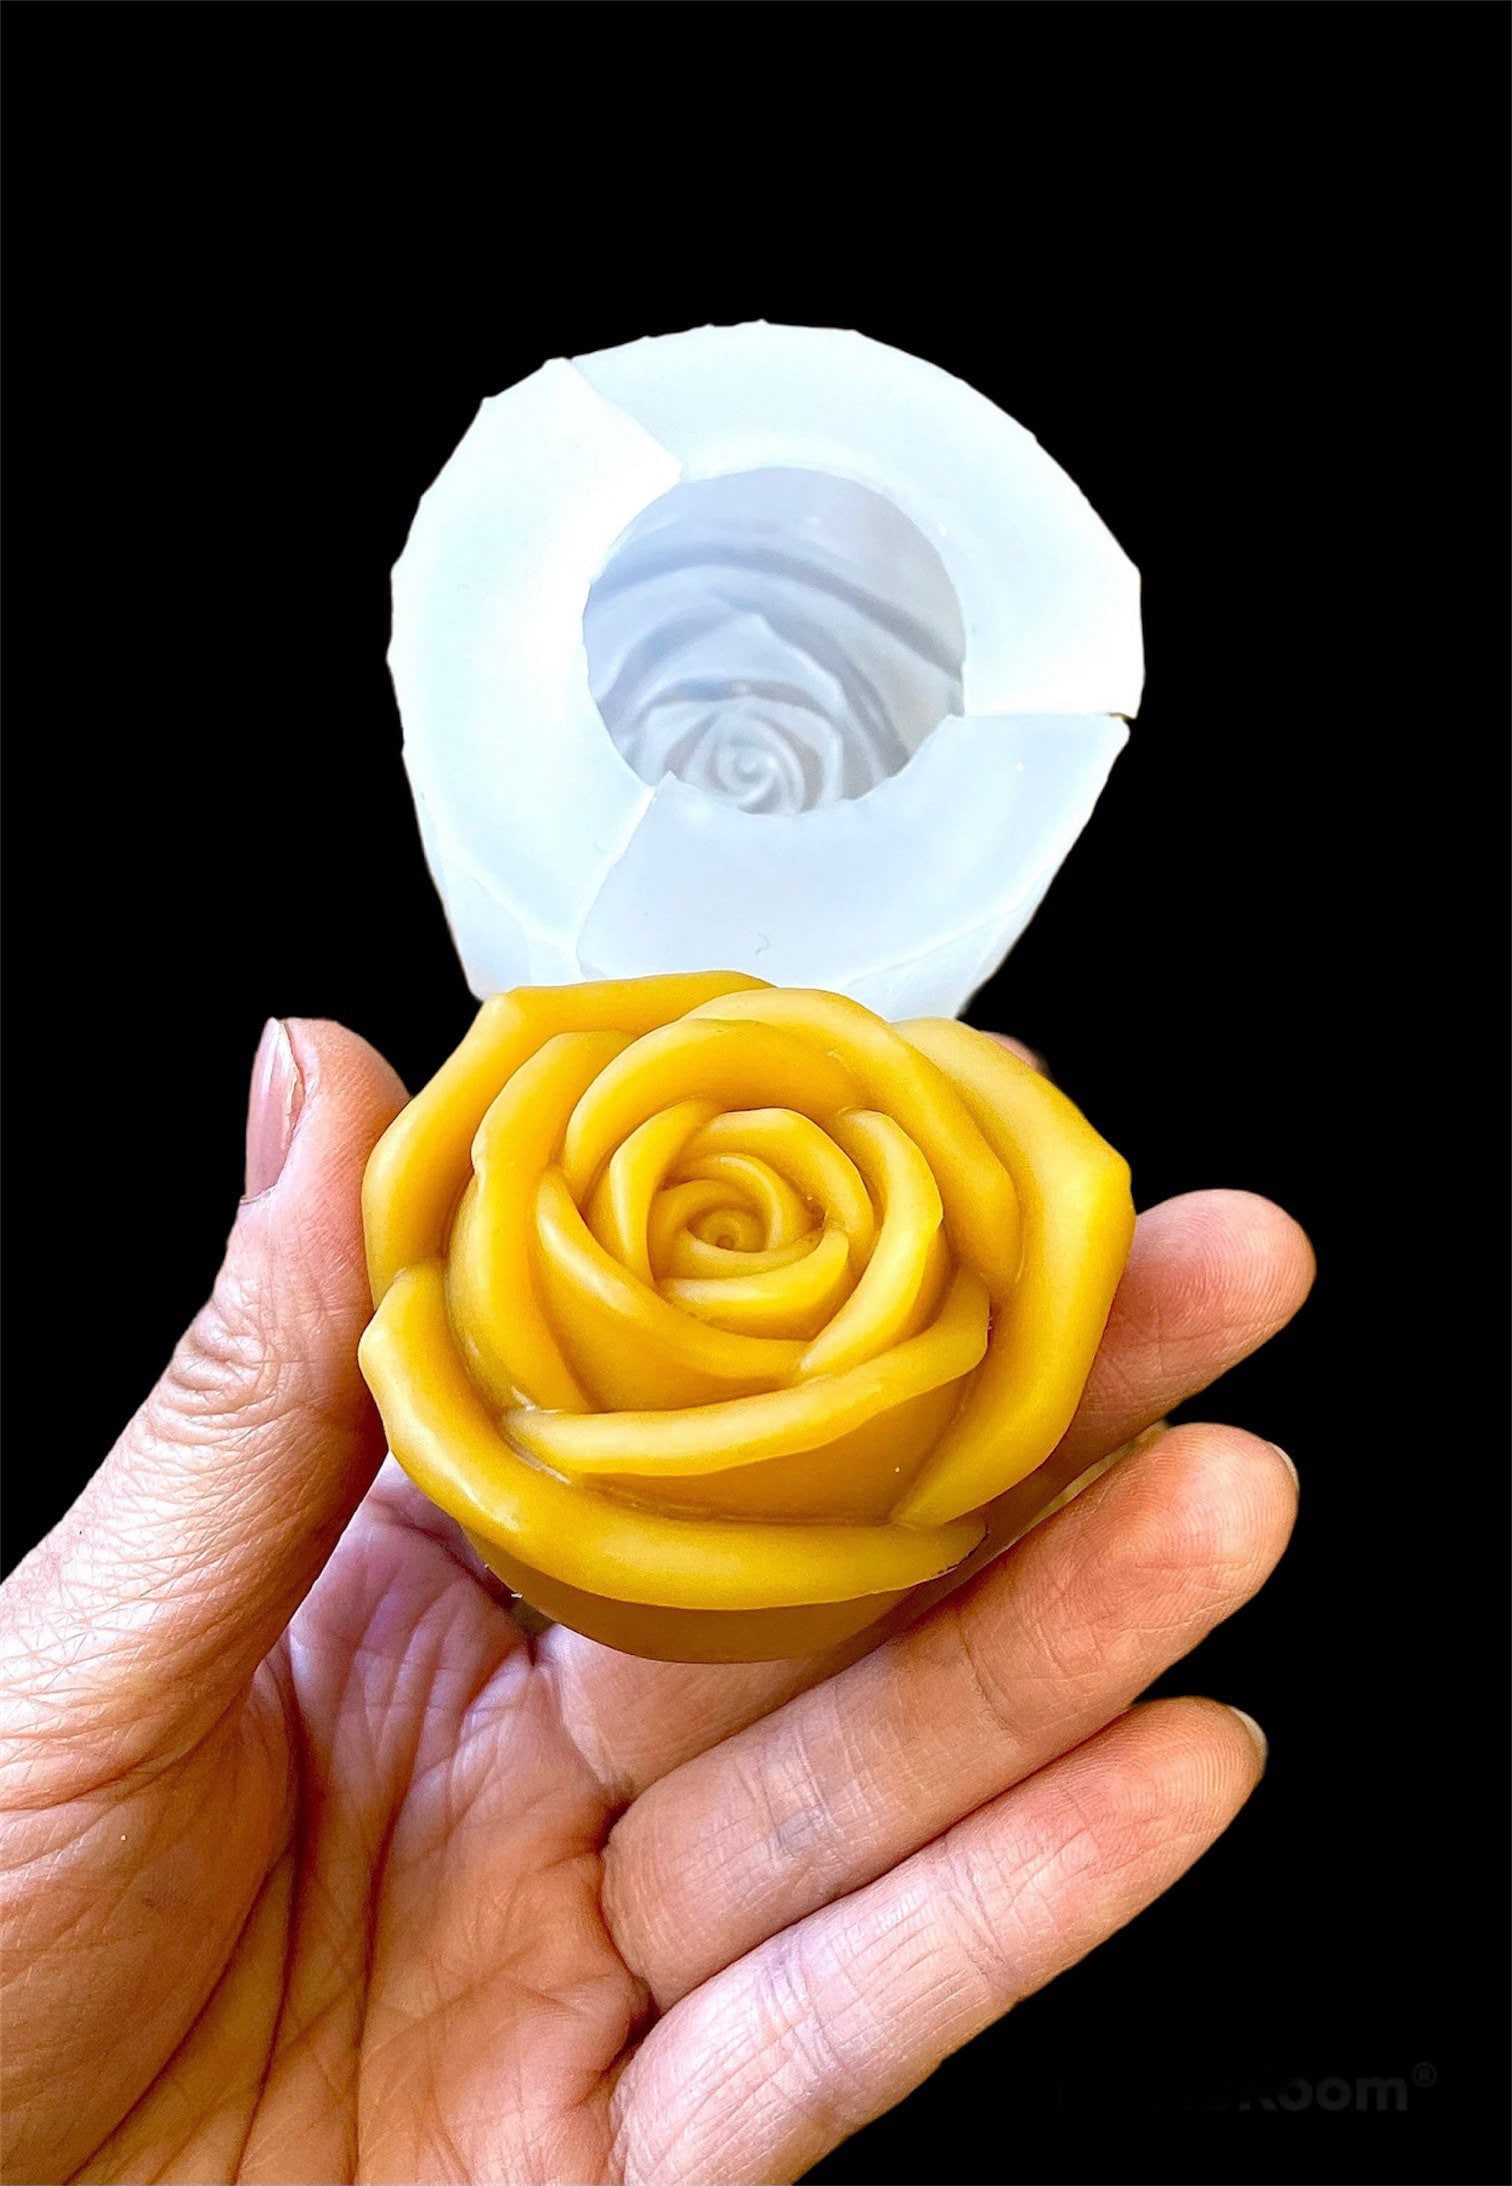 KuuGuu 3 Pack 3D Flower Bloom Rose Silicone Molds Resin Rose Candle Mold for Cake Decoration Chocolate Handmade Soap Candy Making Craft Art